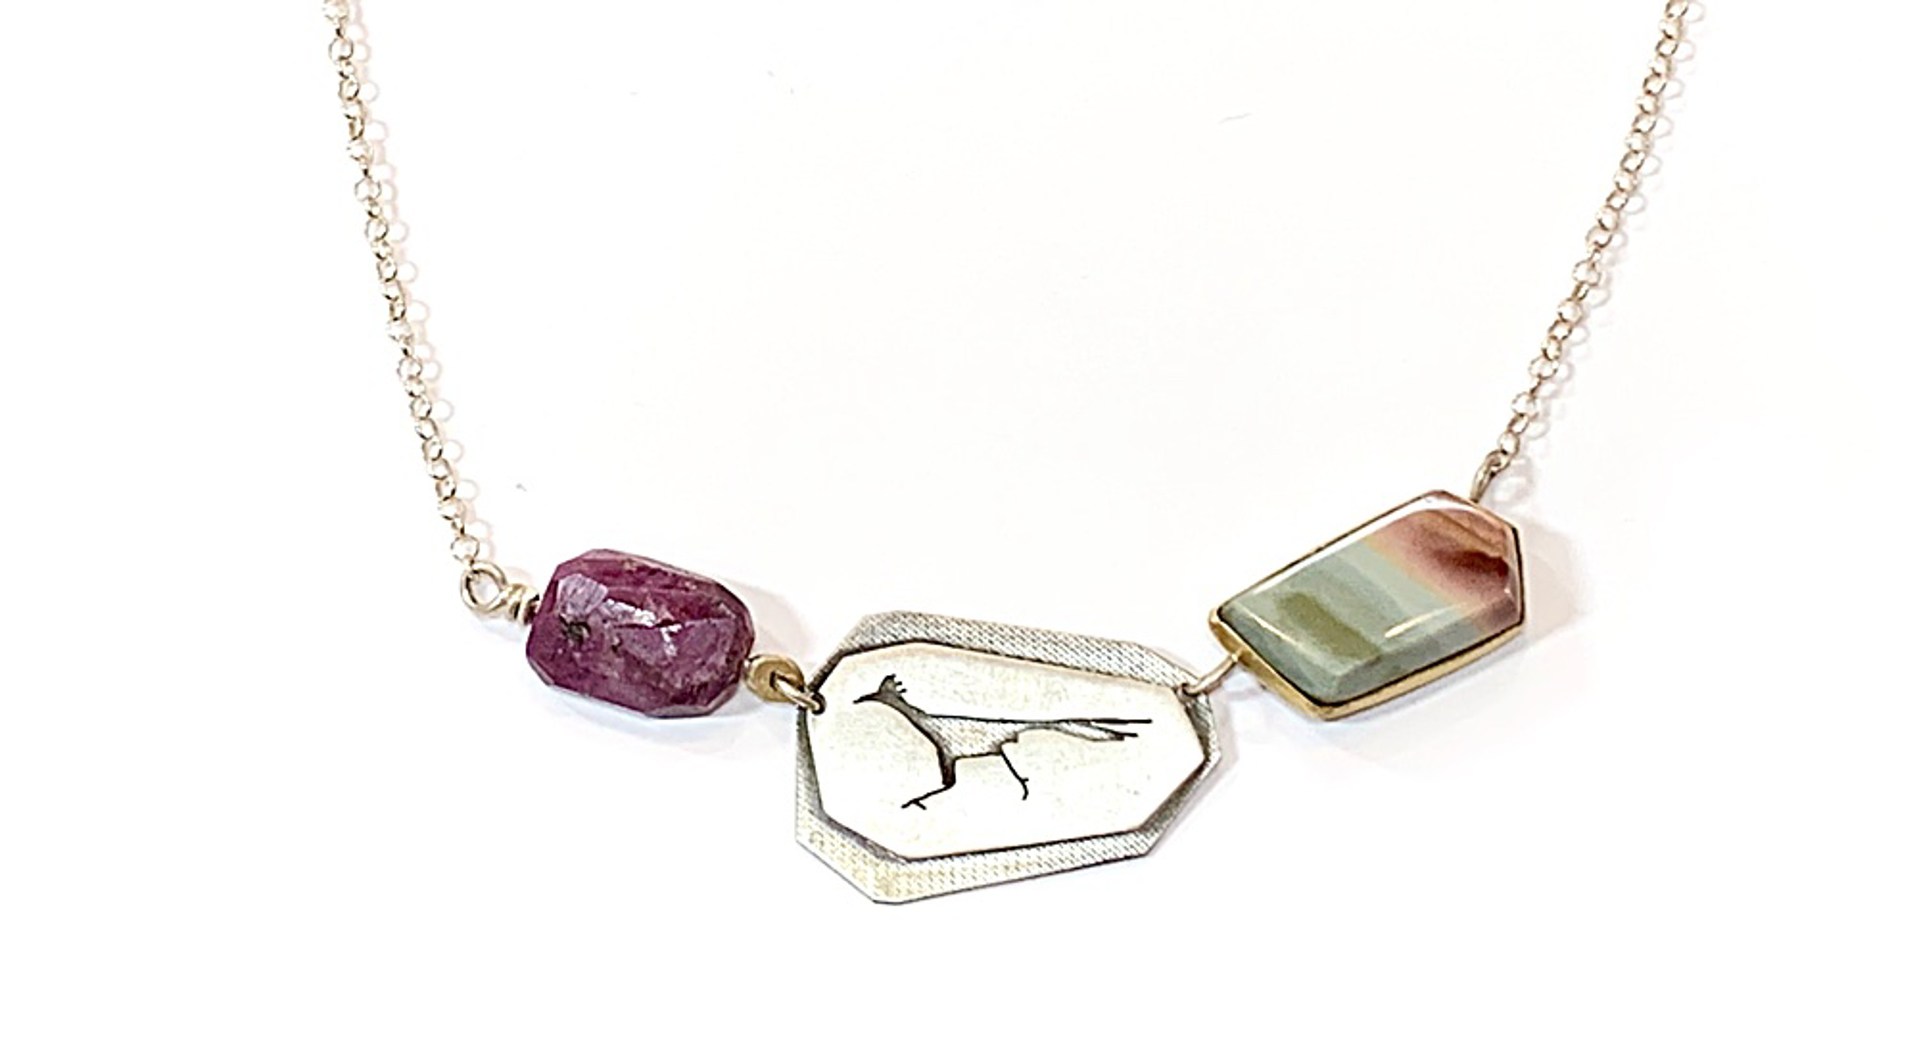 Necklace - Roadrunner with Ruby & Picture Jasper set in Sterling Silver by Pattie Parkhurst